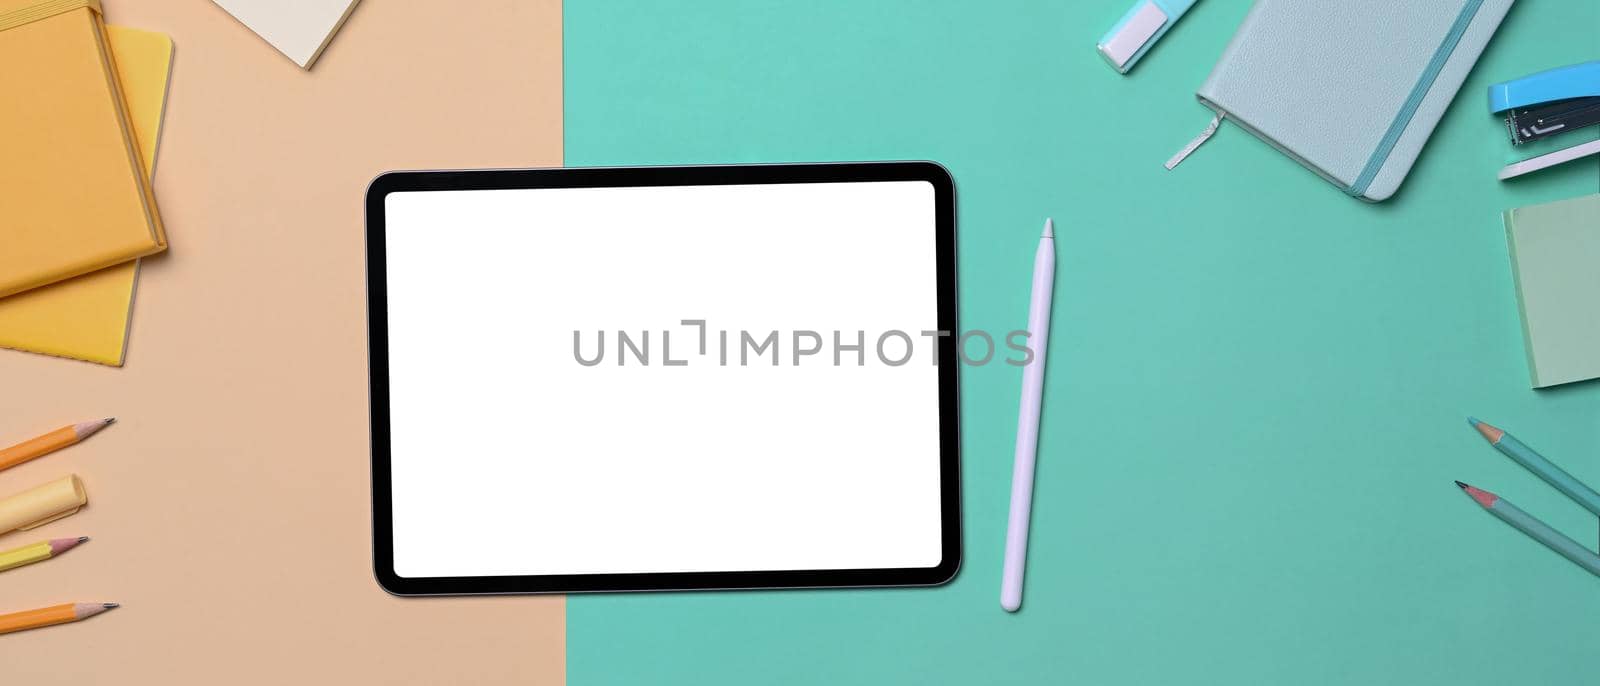 Mock up digital tablet, stylus pen and stationery on colorful background.